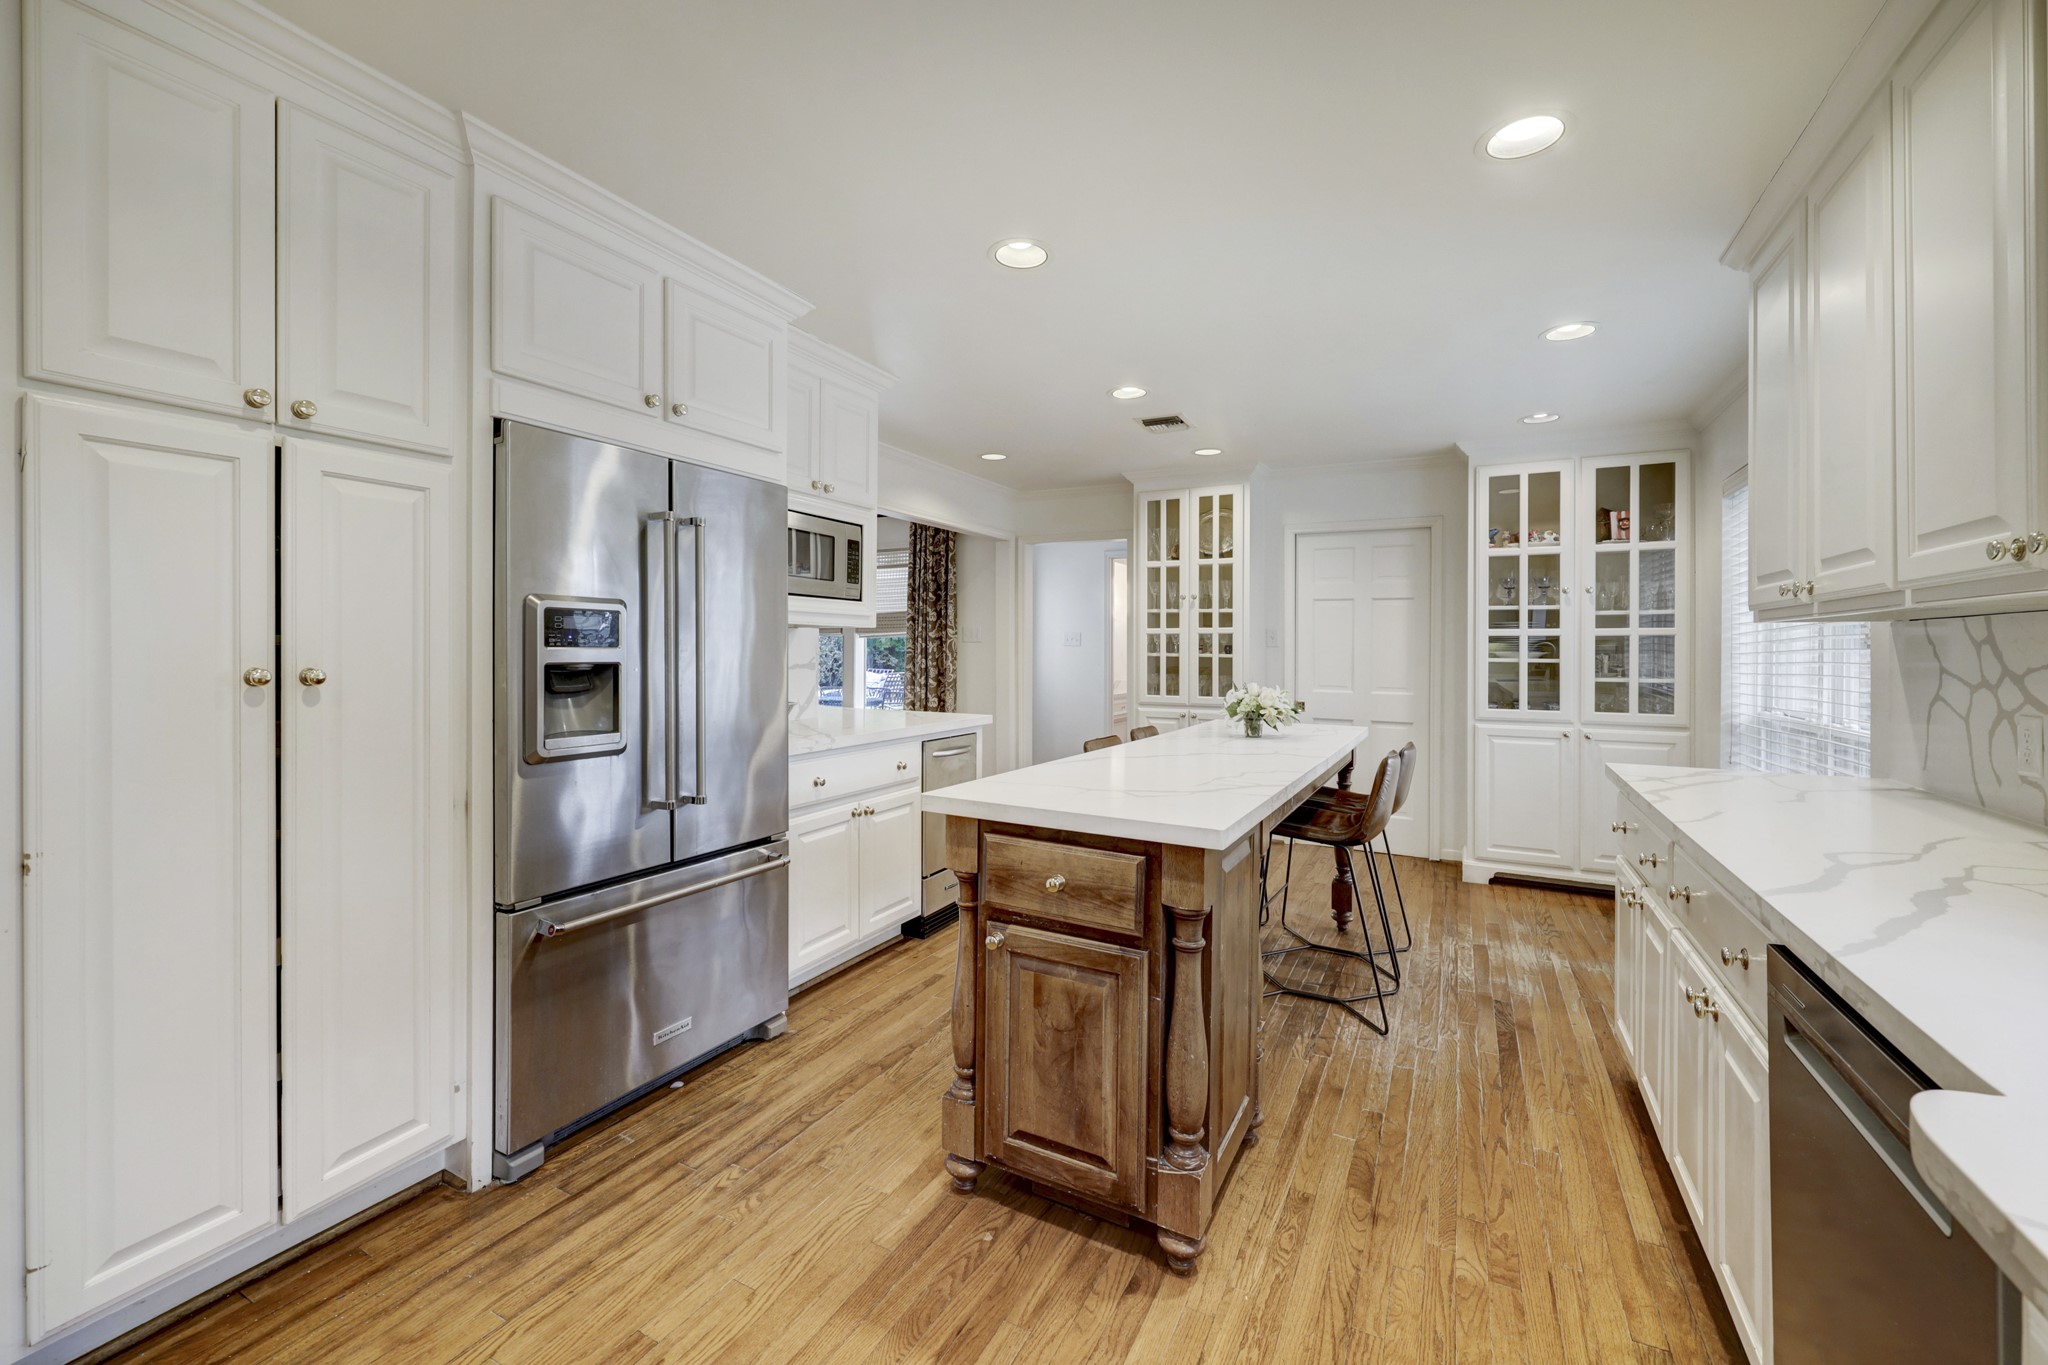 Note the abundant, customized storage space in the updated island kitchen.